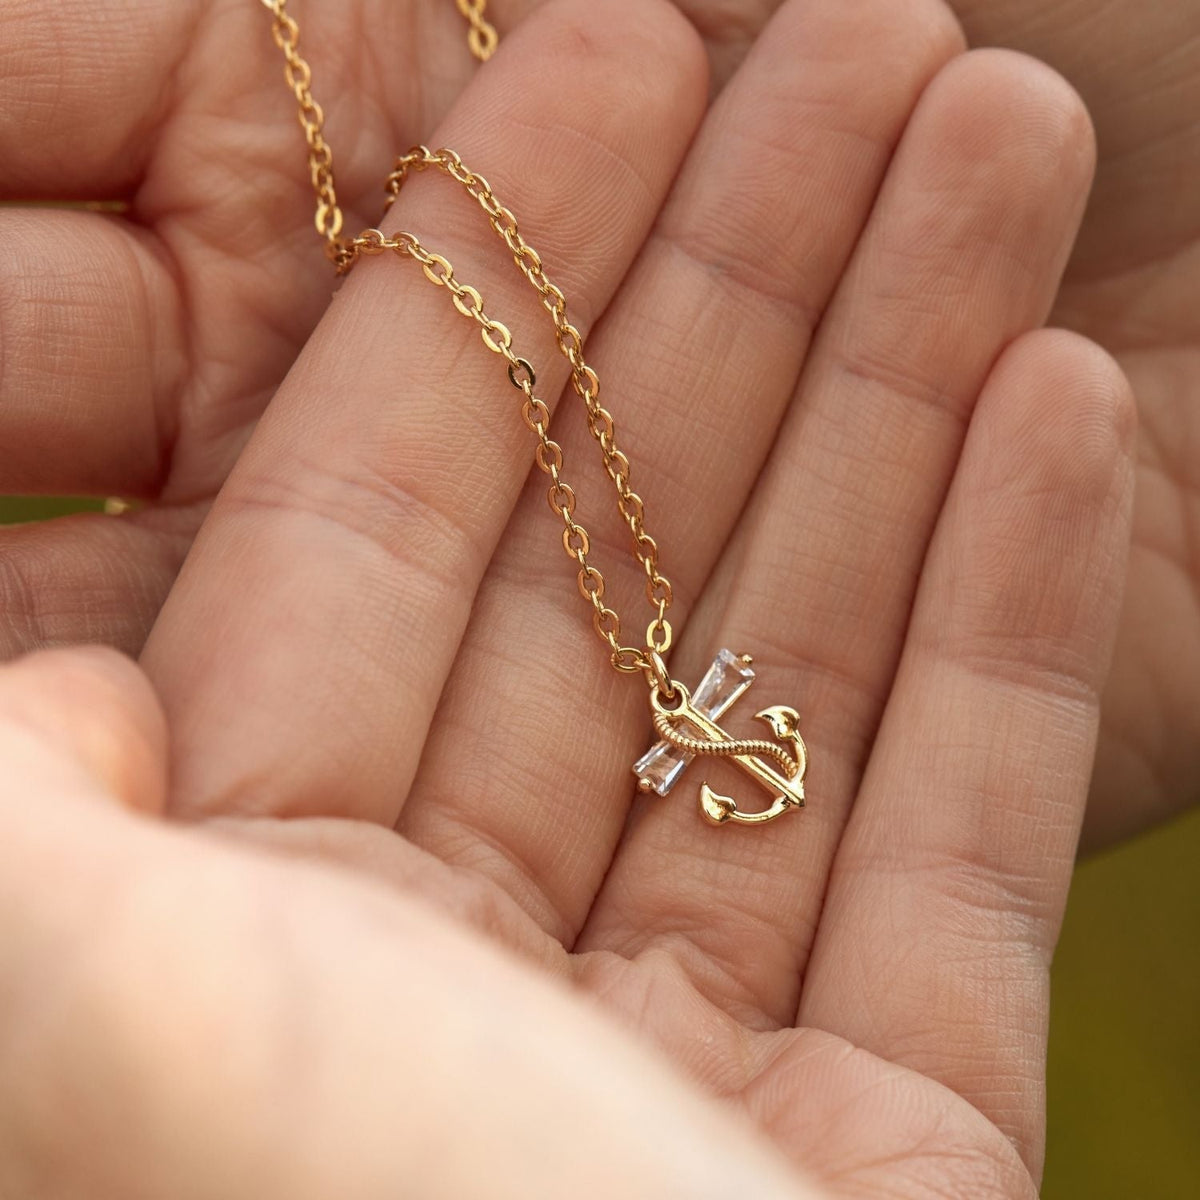 Mama to an Angel | Carried You Every Second of Your Life | Anchor Necklace